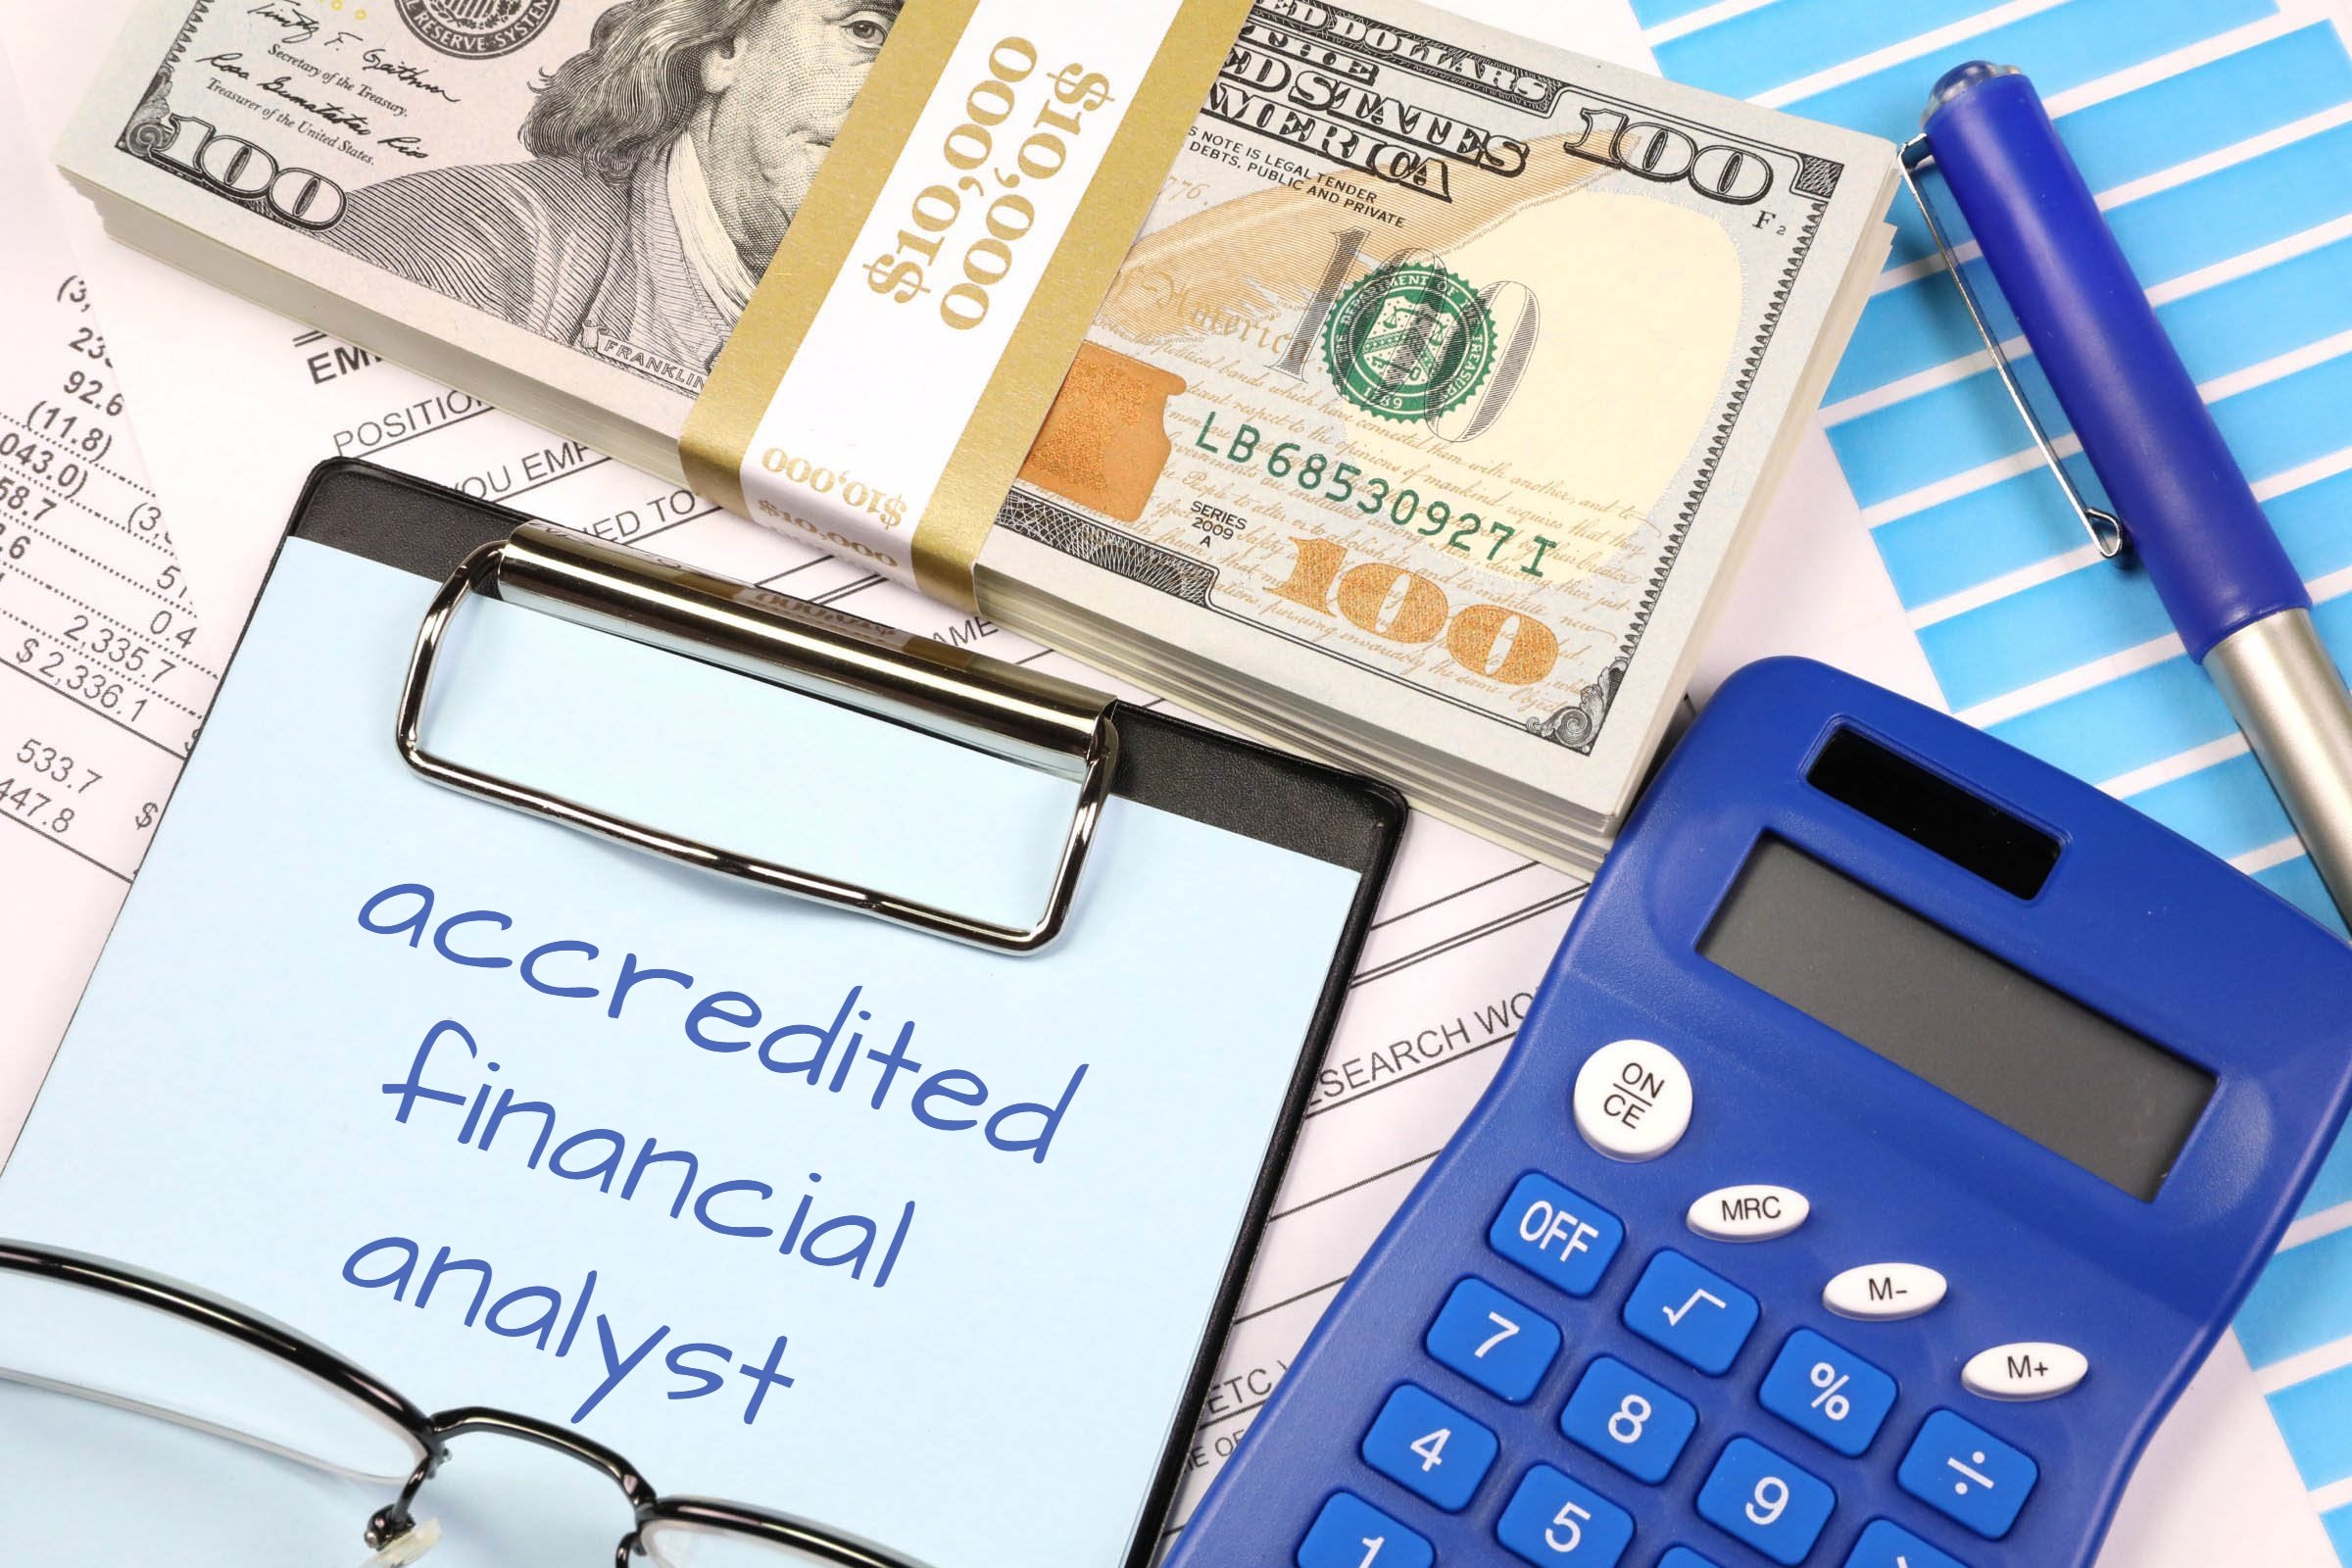 Accredited Financial Analyst